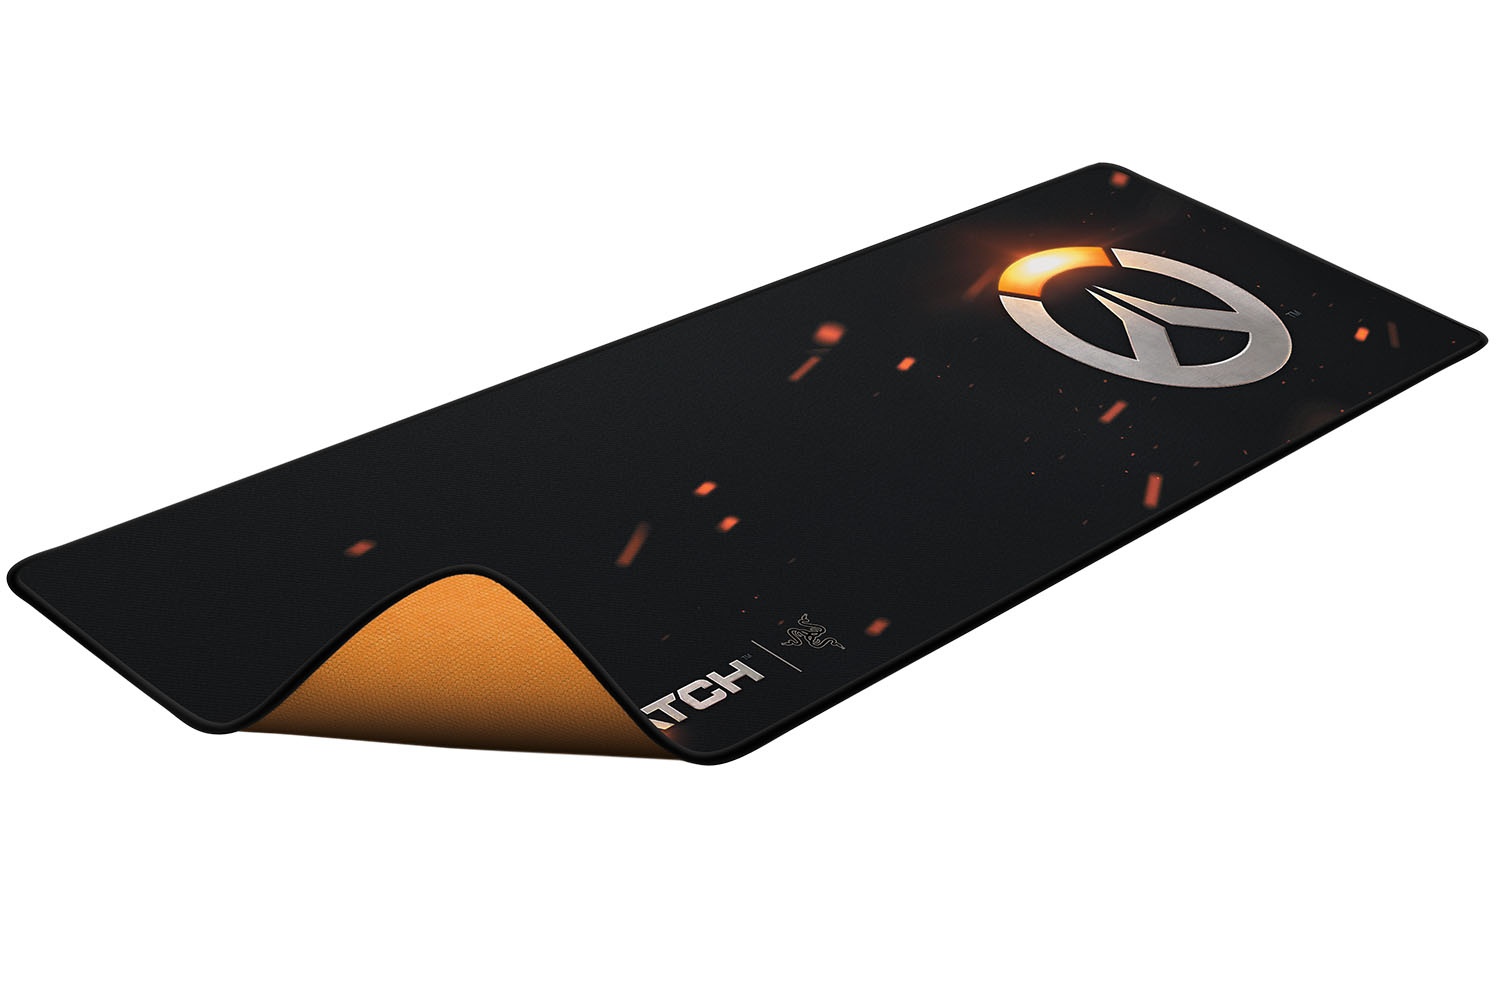 overwatch-gaming-mousepad-2-1500x1000